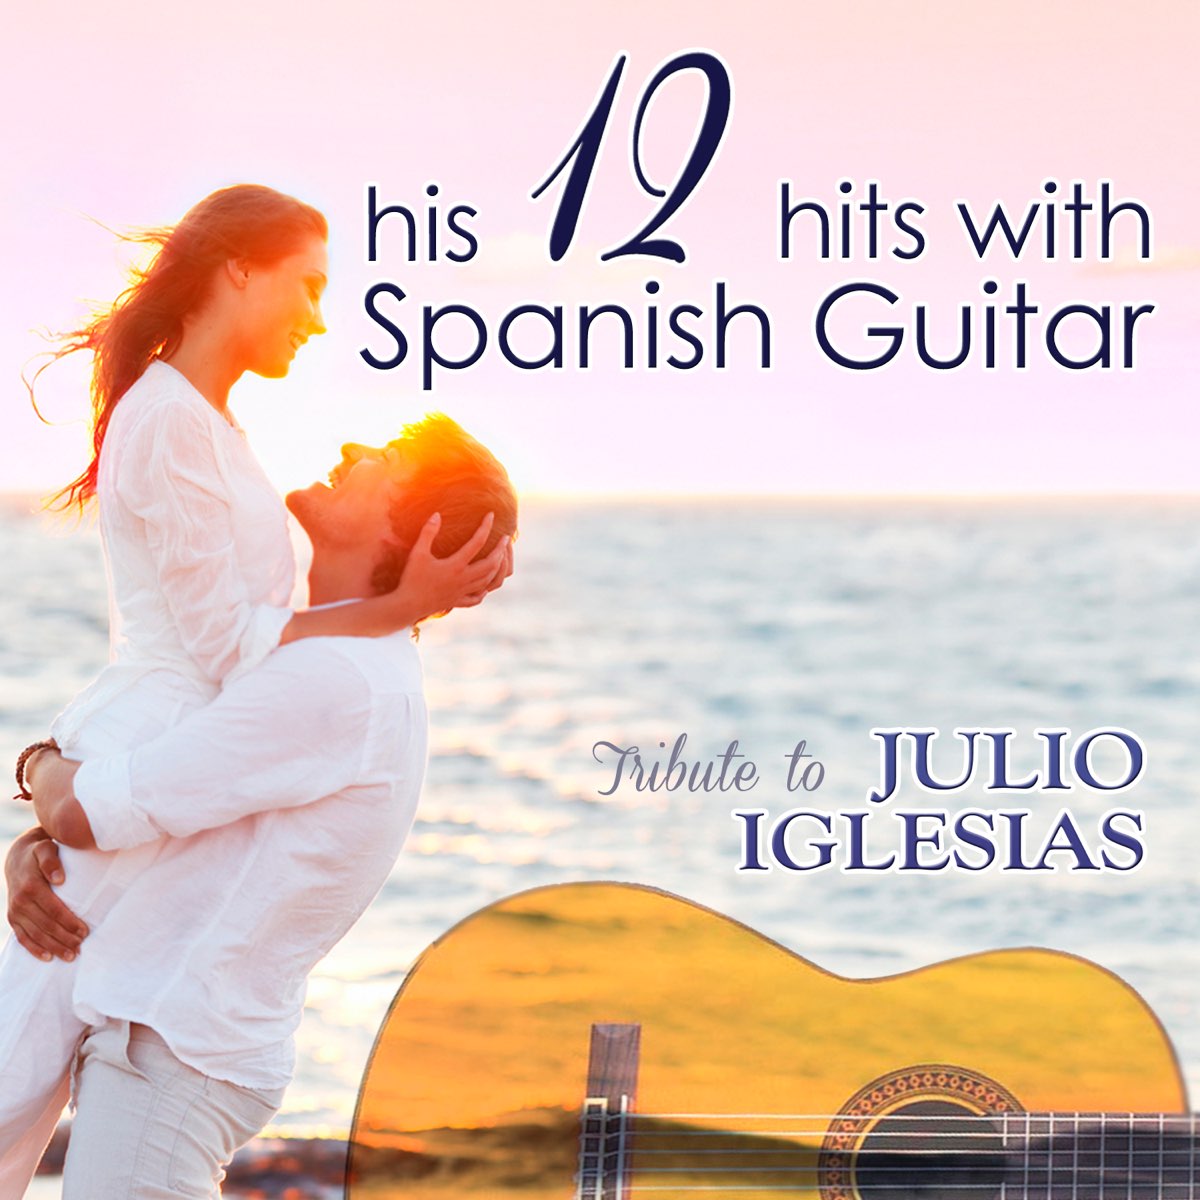 Tribute to Julio Iglesias, His 12 Hits with Spanish Guitar by Juan España  on Apple Music